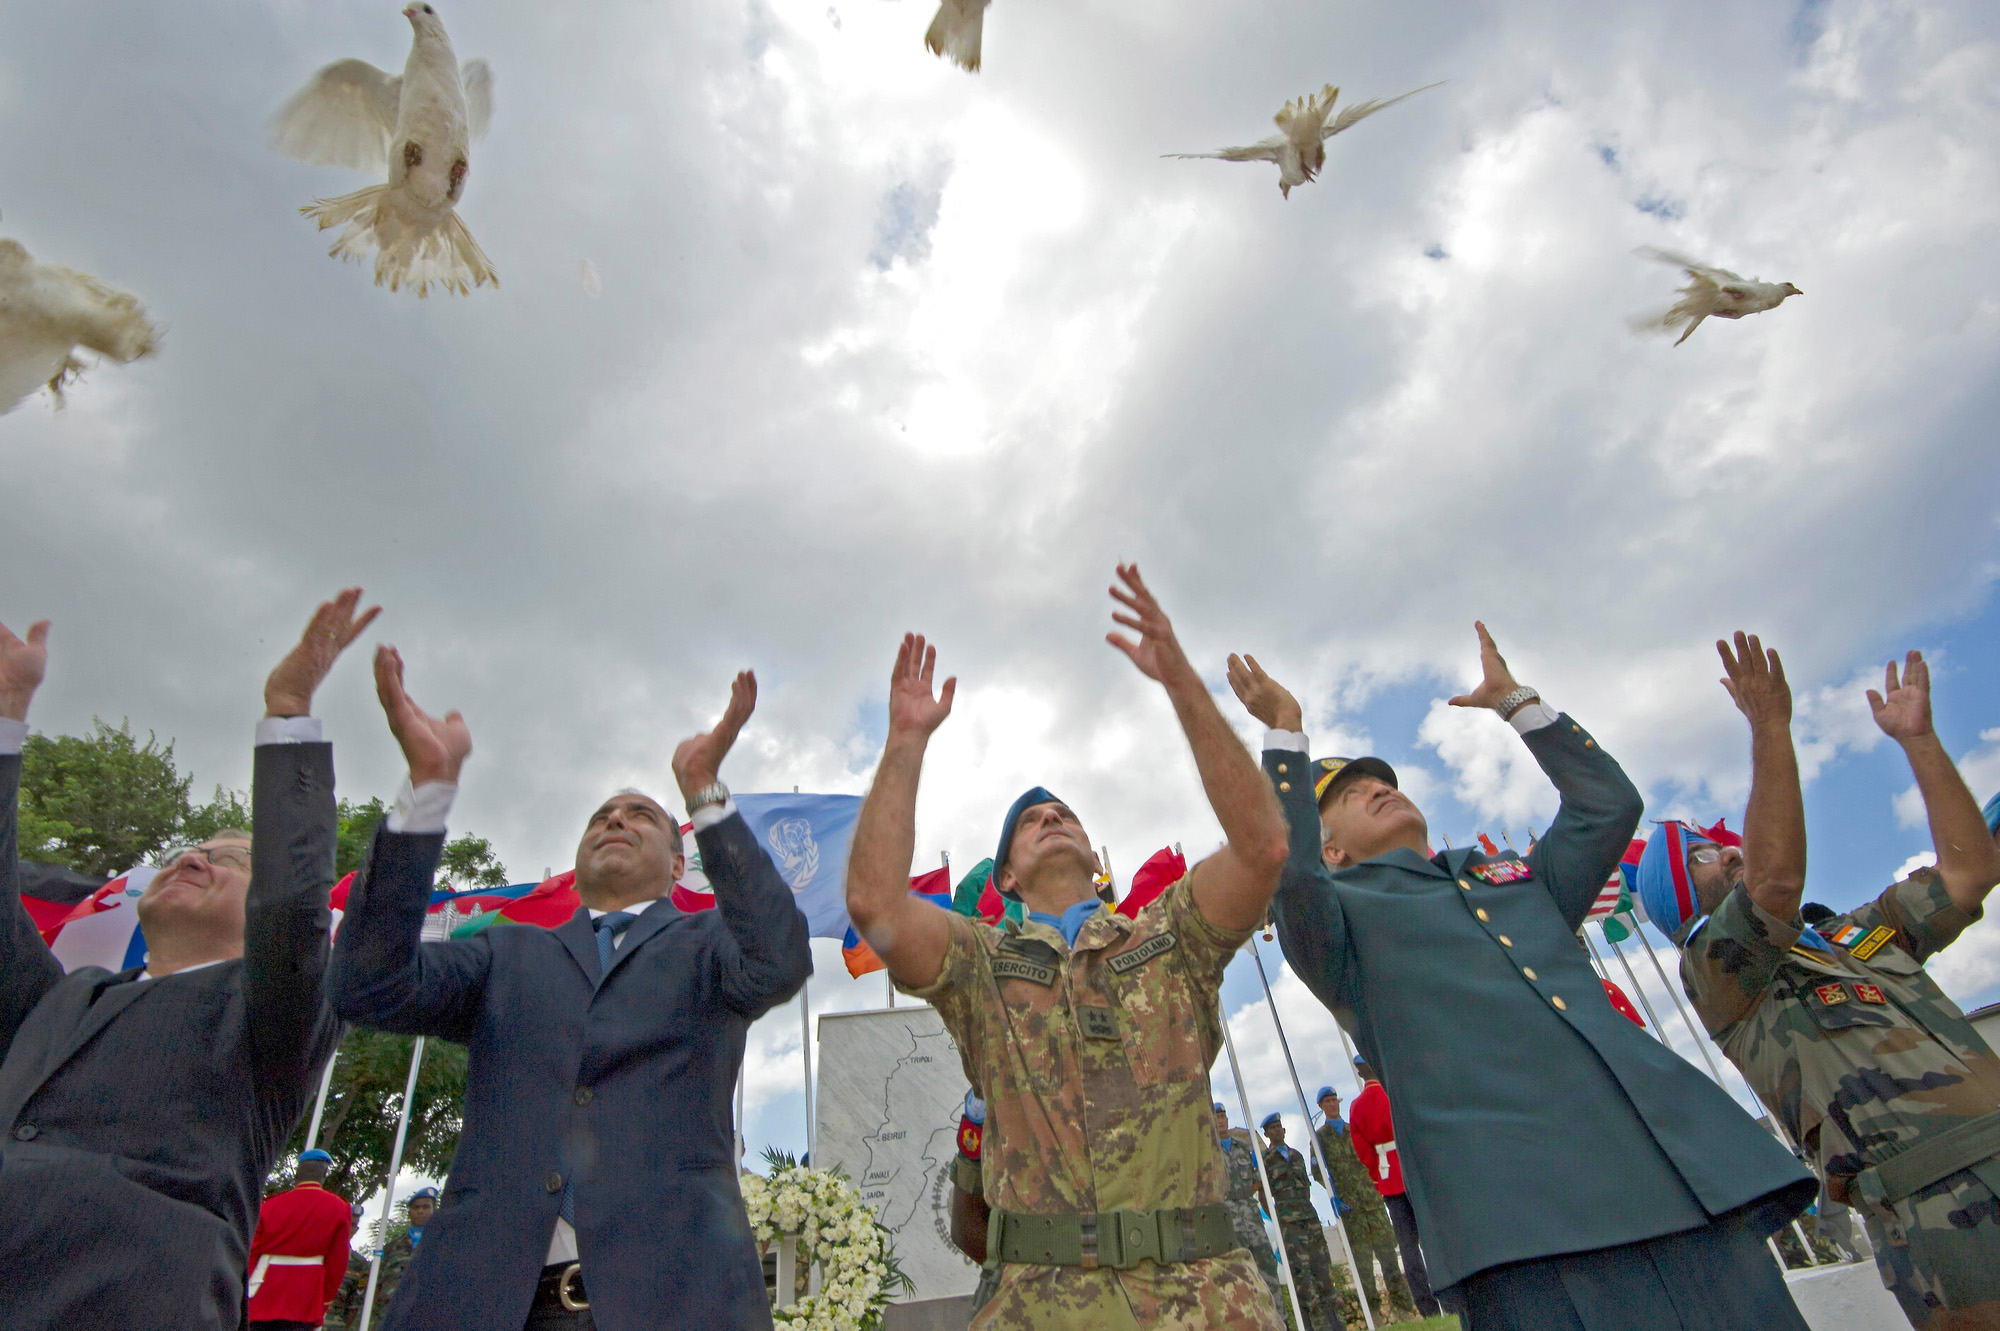 Two men in suits and two men in military officer uniforms release doves unto the air